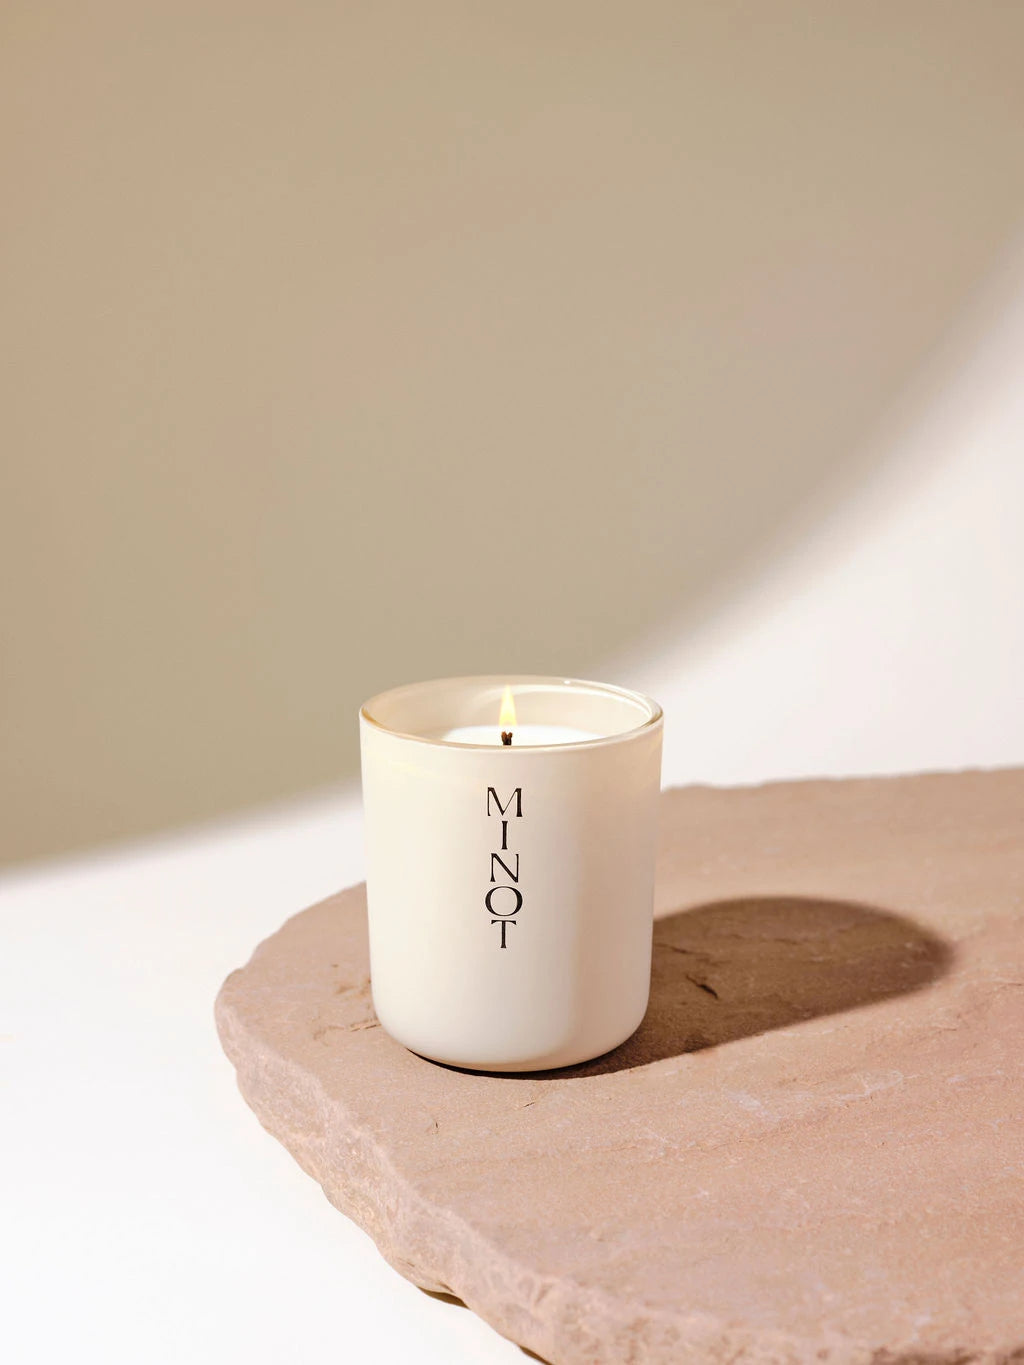 Cove is a calming, non-toxic lavender scented candle with sage and cedarwood fragrances